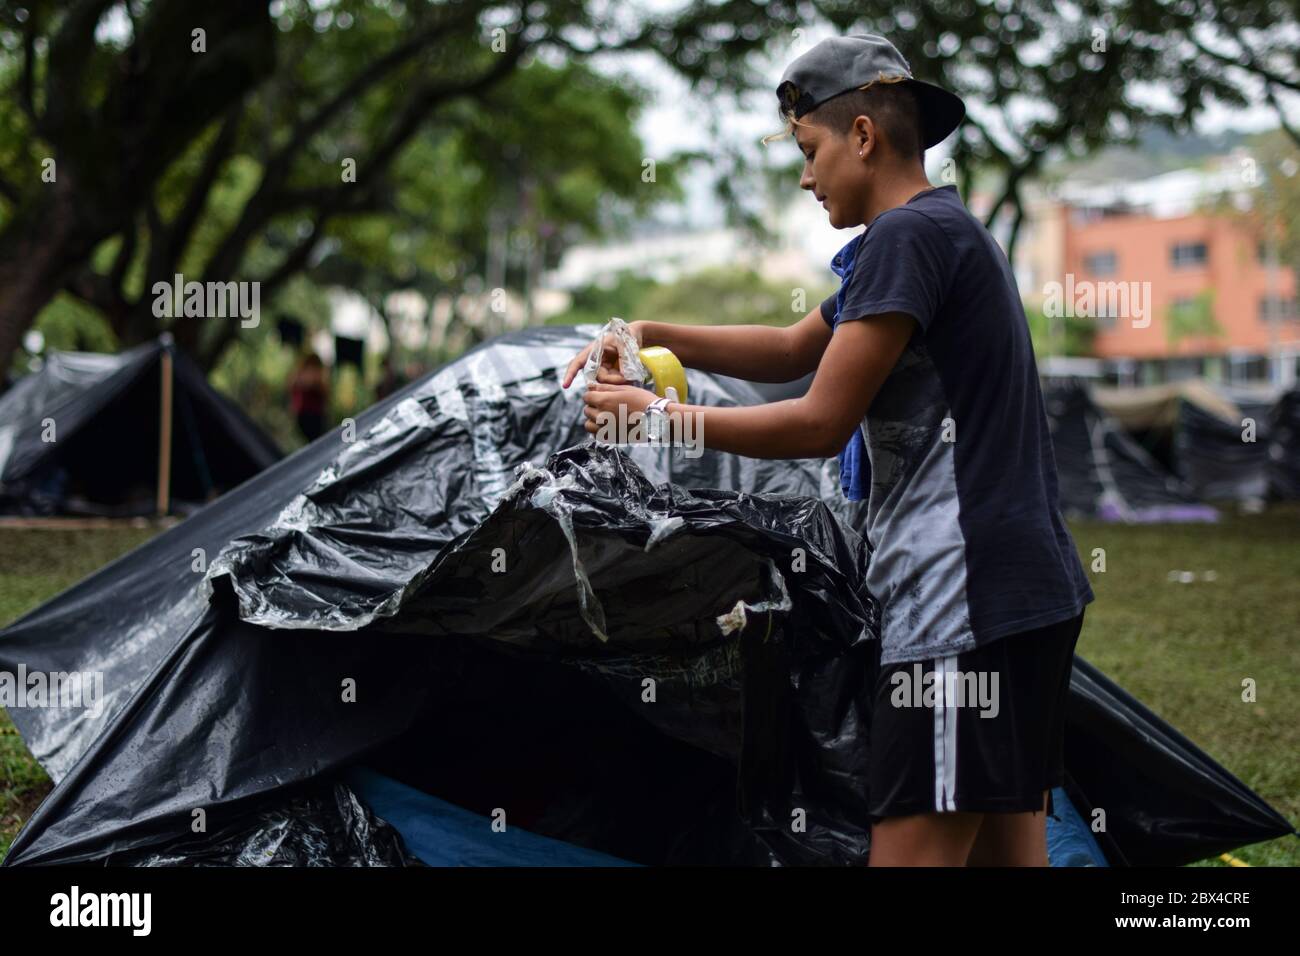 Stranded Venezuelans build makeshift camp in a tree-covered park amid Covid-19 pandemic, waiting for an opportunity to return to their country, Cali, Stock Photo